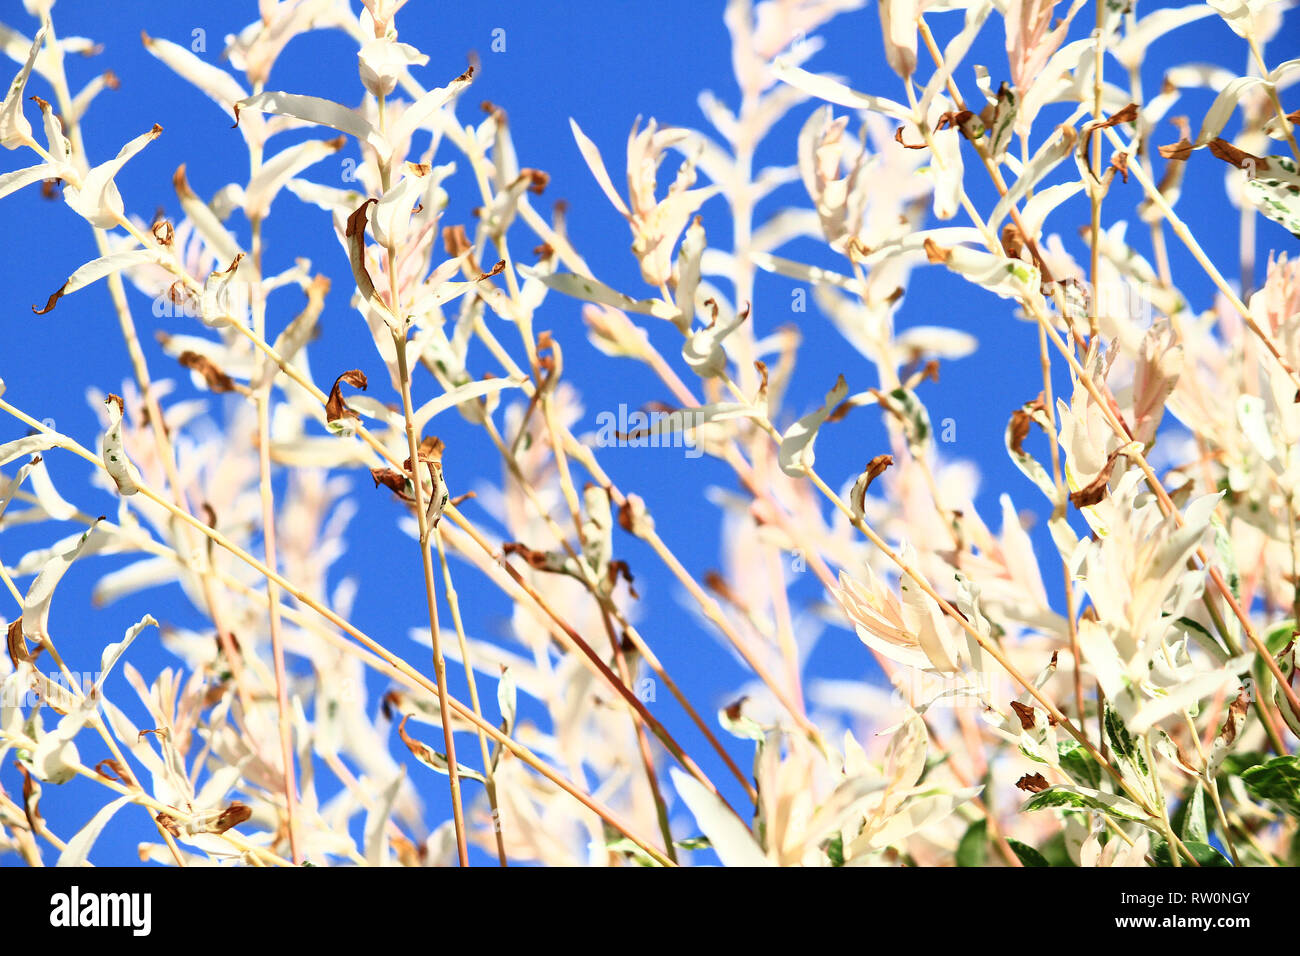 Cream white foliage close up, abstract Vegetation details background. Bright branches and leaves, flora patterns full of light with indigo blue sky. Stock Photo